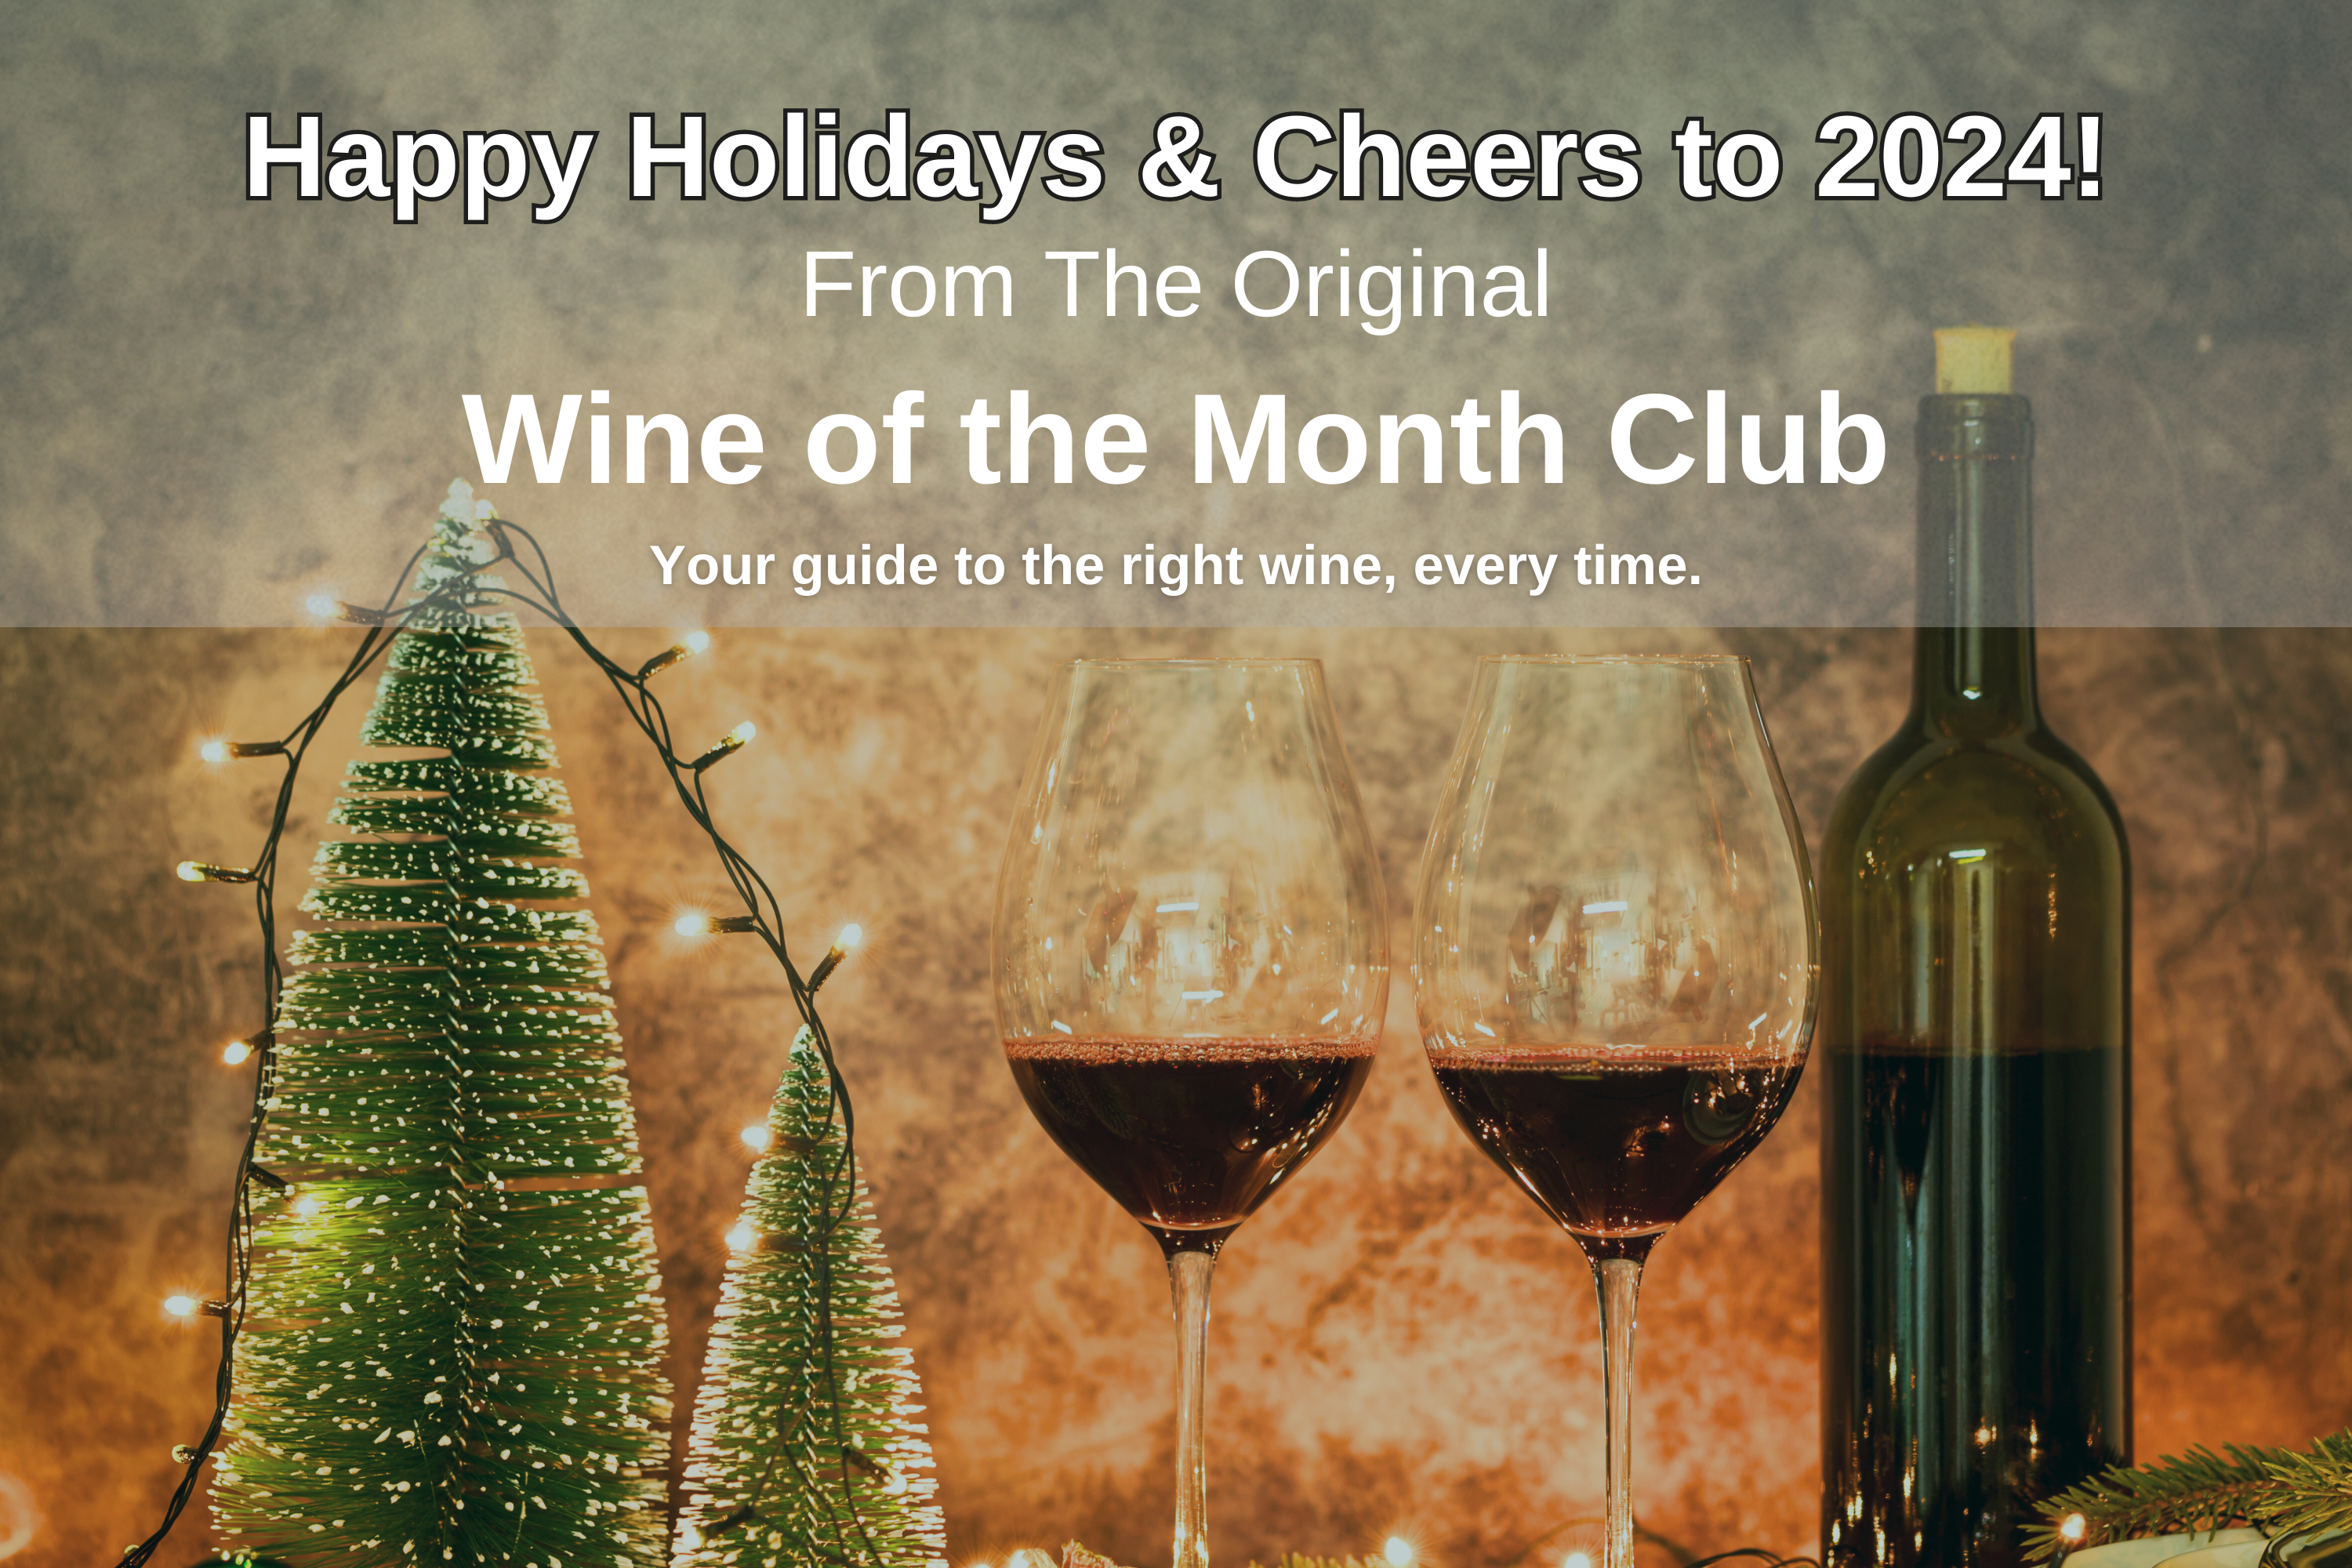 https://wineofthemonthclub.com/cdn/shop/files/Copy_of_WOMC_Holiday_Hero_Images.png?v=1703183540&width=3840